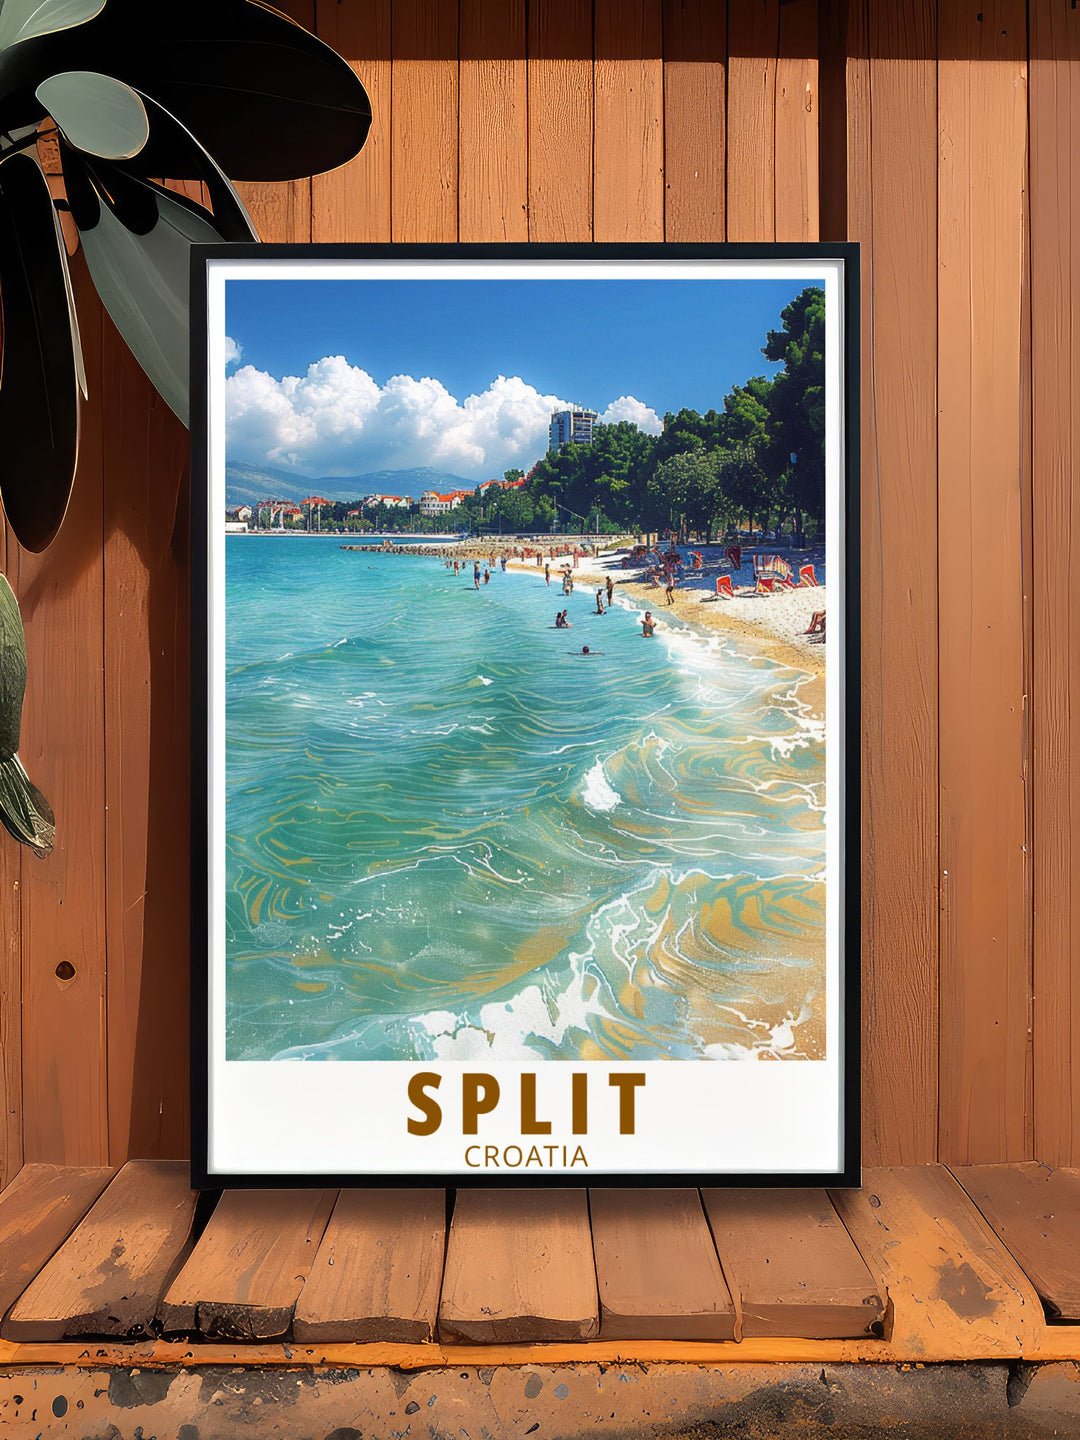 Bačvice Beach in Split is beautifully illustrated in this poster, showcasing its lively atmosphere and crystal clear waters, perfect for art lovers and beach enthusiasts.